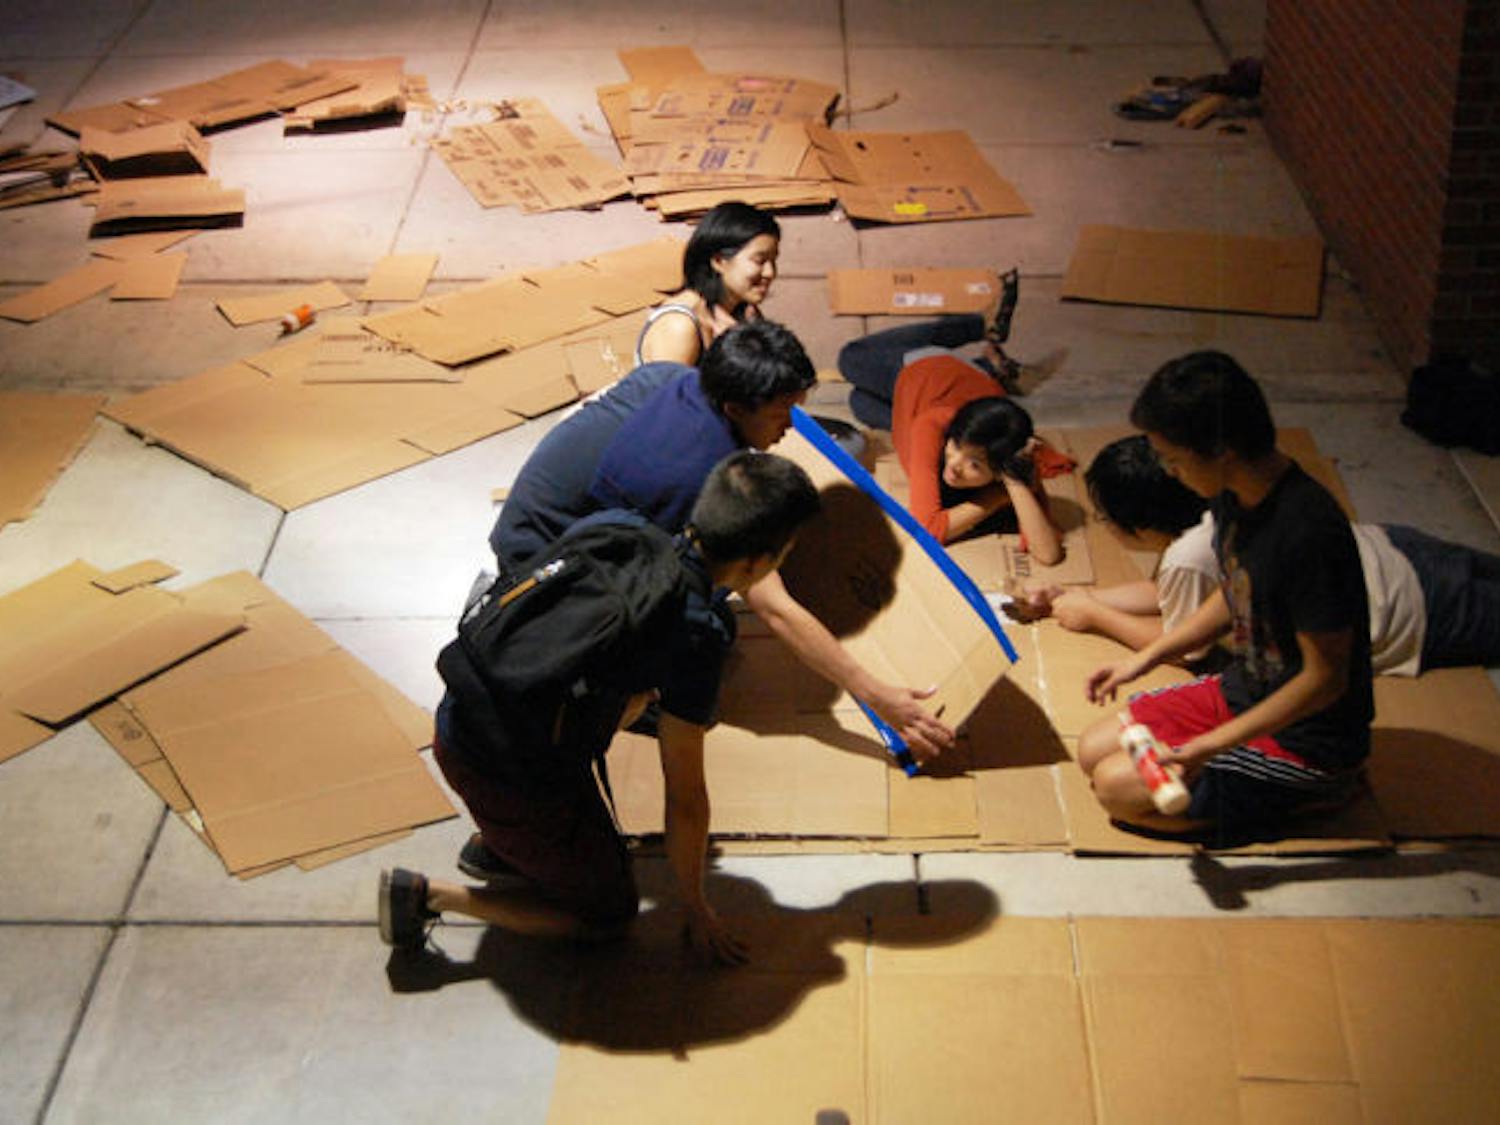 Members of UF’s Asian American Student Union prepare cardboard mats in the Reitz Union breezeway Wednesday evening for the Cardboard Ox activity, which was held during the AASU Field Day on Monday.